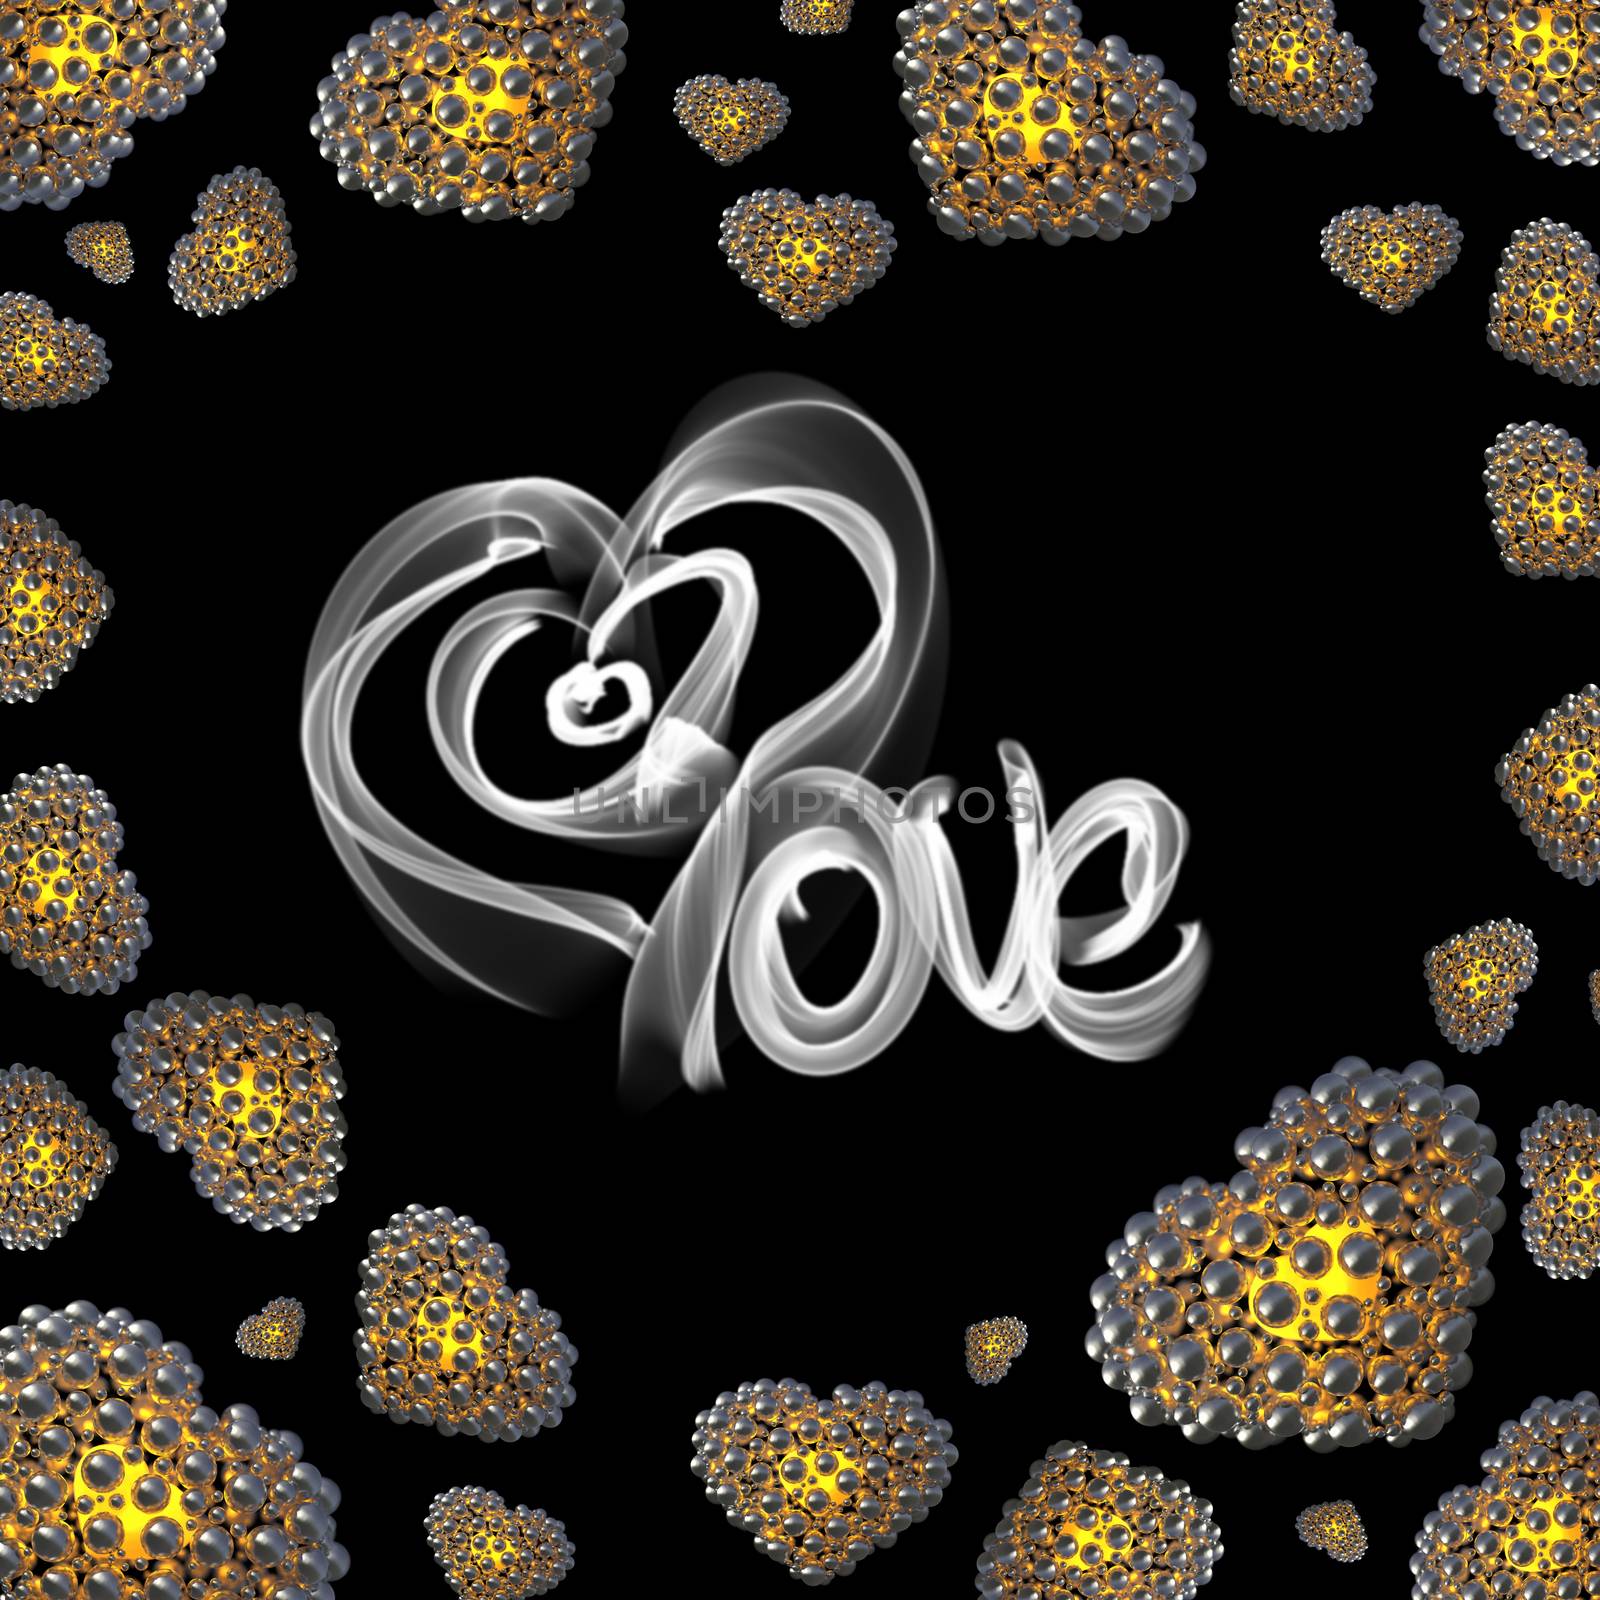 metal Gold hearts made of spheres isolated on black background with Love lettering written by fire or smoke. Happy valentines day 3d illustration.